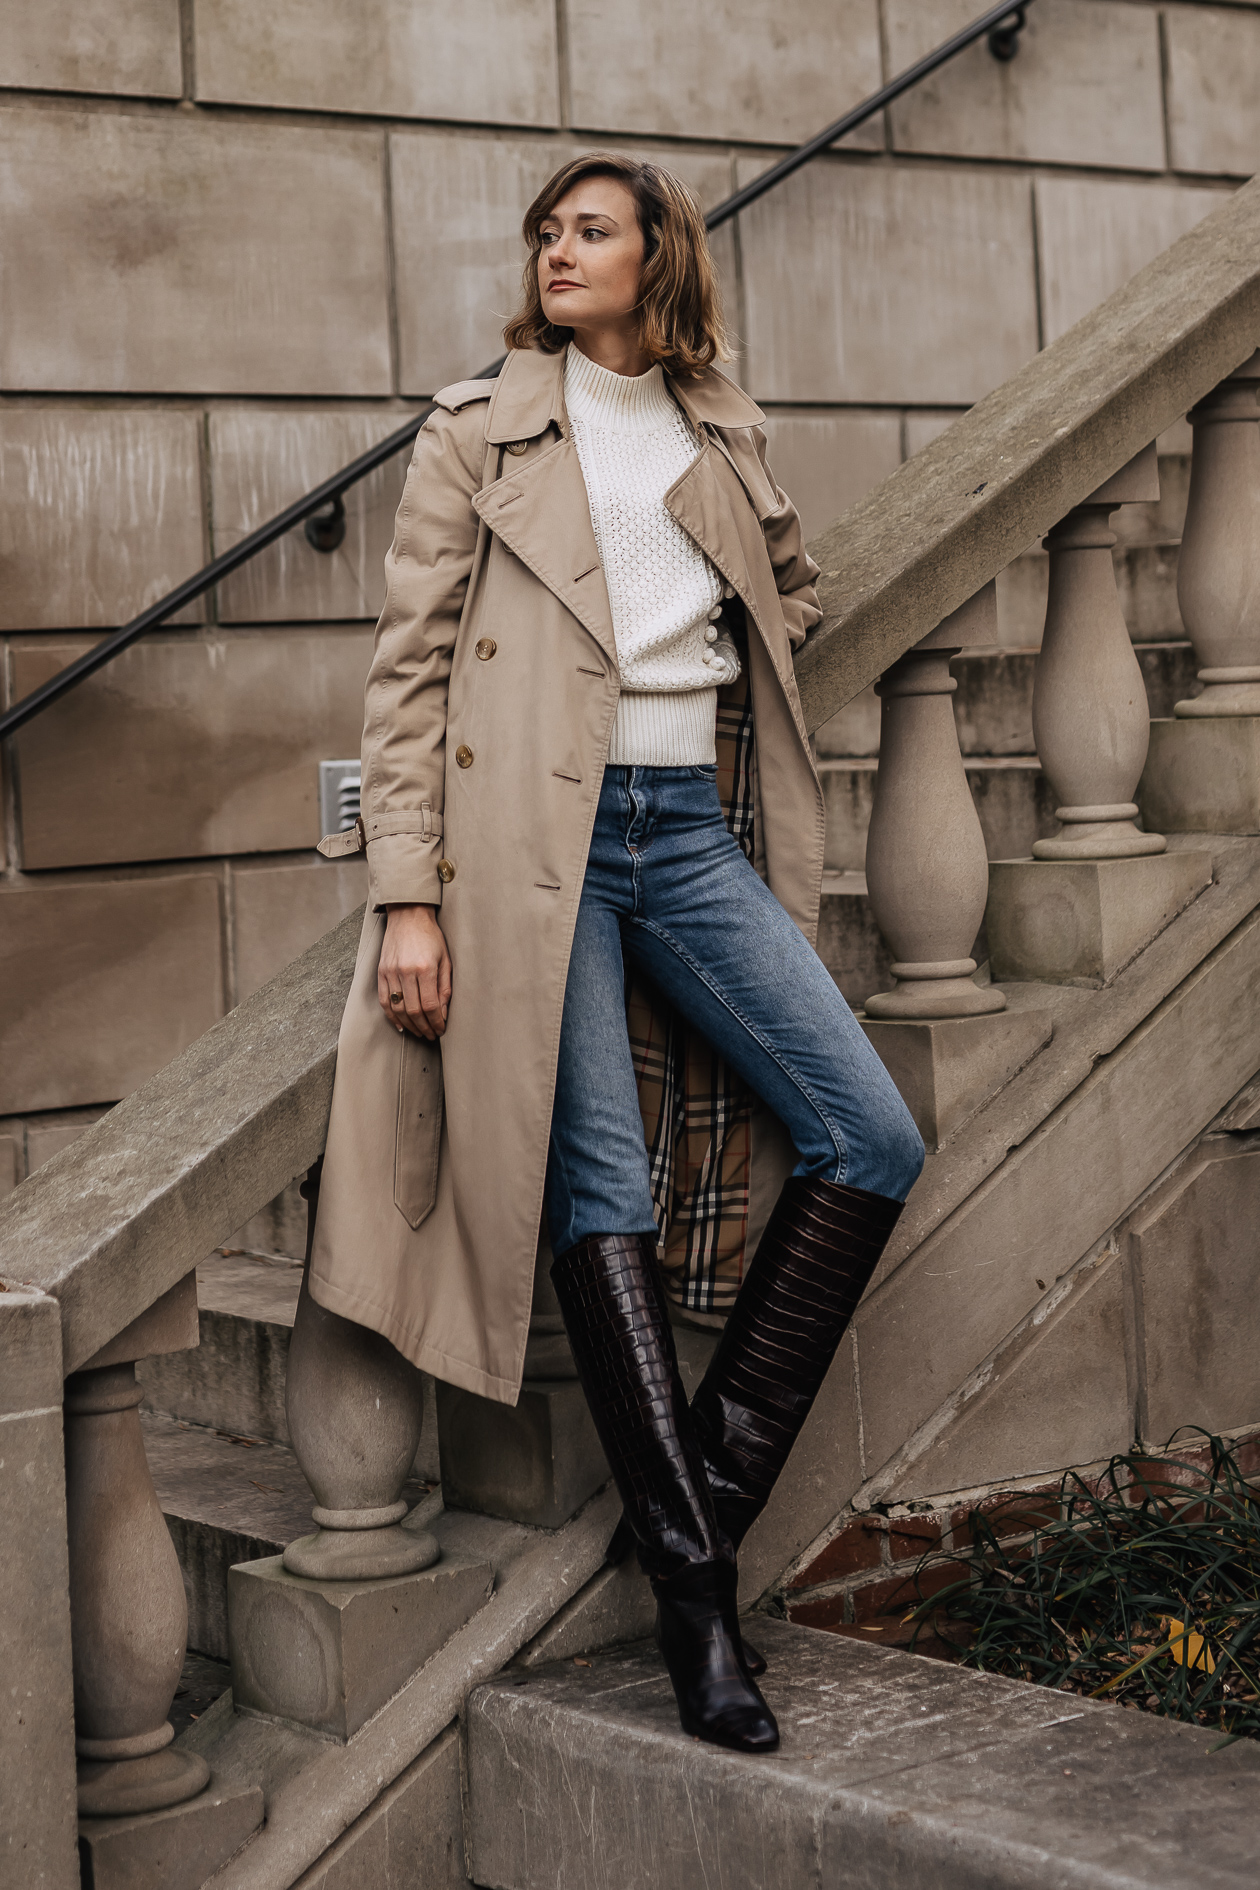 classic trench coat & knee high boots outfit